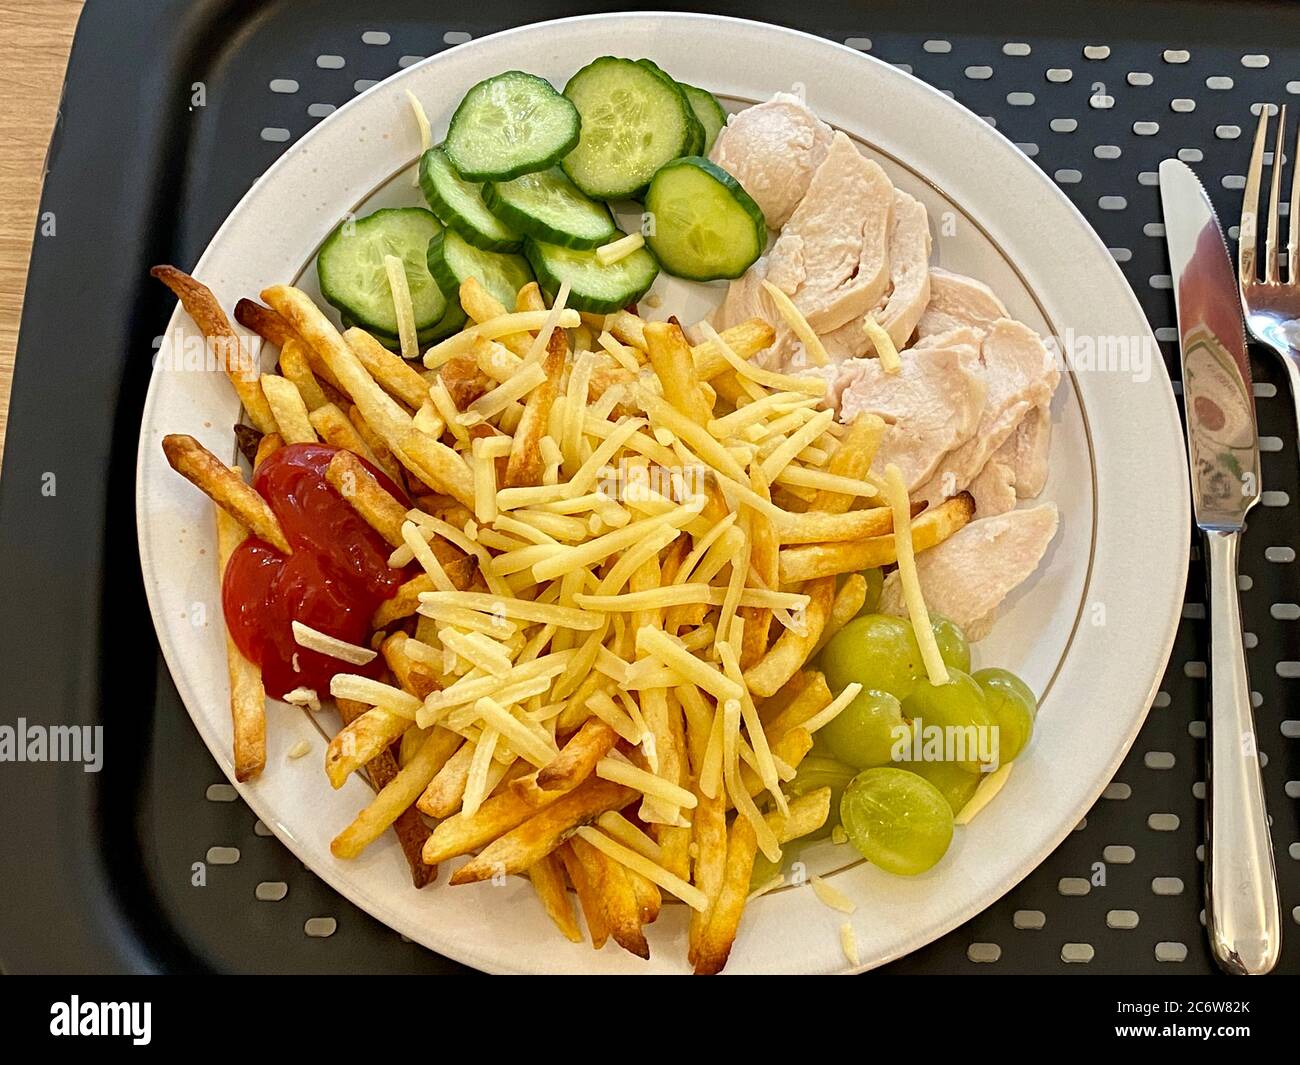 Chicken chips and salad dinner on plate and tray Stock Photo